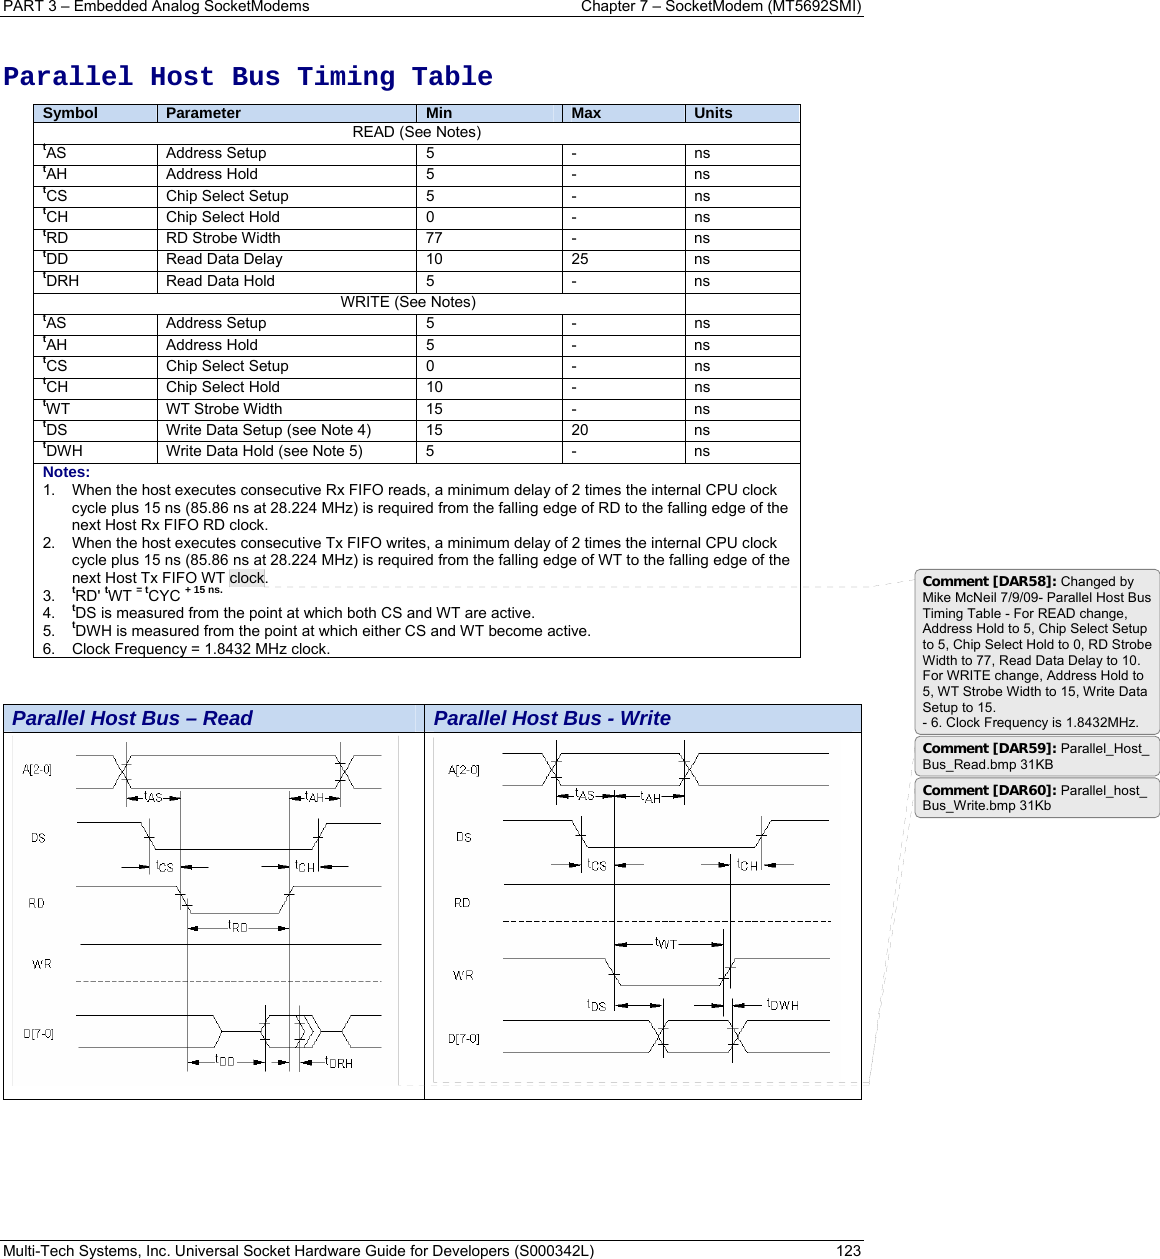 PART 3 – Embedded Analog SocketModems    Chapter 7 – SocketModem (MT5692SMI) Multi-Tech Systems, Inc. Universal Socket Hardware Guide for Developers (S000342L)  123   Parallel Host Bus Timing Table Symbol  Parameter  Min  Max  Units READ (See Notes) tAS Address Setup  5  -  ns tAH Address Hold  5   -  ns tCS Chip Select Setup  5  -  ns tCH Chip Select Hold  0  -  ns tRD RD Strobe Width  77  -  ns tDD Read Data Delay  10  25  ns tDRH Read Data Hold  5  -  ns                        WRITE (See Notes)   tAS Address Setup  5  -  ns tAH Address Hold  5  -  ns tCS Chip Select Setup  0  -  ns tCH Chip Select Hold  10  -  ns tWT WT Strobe Width  15  -  ns tDS Write Data Setup (see Note 4)  15  20  ns tDWH Write Data Hold (see Note 5)  5  -  ns Notes: 1.  When the host executes consecutive Rx FIFO reads, a minimum delay of 2 times the internal CPU clock cycle plus 15 ns (85.86 ns at 28.224 MHz) is required from the falling edge of RD to the falling edge of the next Host Rx FIFO RD clock. 2.  When the host executes consecutive Tx FIFO writes, a minimum delay of 2 times the internal CPU clock cycle plus 15 ns (85.86 ns at 28.224 MHz) is required from the falling edge of WT to the falling edge of the next Host Tx FIFO WT clock. 3.  tRD&apos; tWT = tCYC + 15 ns. 4.  tDS is measured from the point at which both CS and WT are active. 5.  tDWH is measured from the point at which either CS and WT become active. 6.  Clock Frequency = 1.8432 MHz clock.    Parallel Host Bus – Read  Parallel Host Bus - Write     Comment [DAR58]: Changed by Mike McNeil 7/9/09- Parallel Host Bus Timing Table - For READ change, Address Hold to 5, Chip Select Setup to 5, Chip Select Hold to 0, RD Strobe Width to 77, Read Data Delay to 10. For WRITE change, Address Hold to 5, WT Strobe Width to 15, Write Data Setup to 15. - 6. Clock Frequency is 1.8432MHz. Comment [DAR59]: Parallel_Host_Bus_Read.bmp 31KB Comment [DAR60]: Parallel_host_Bus_Write.bmp 31Kb